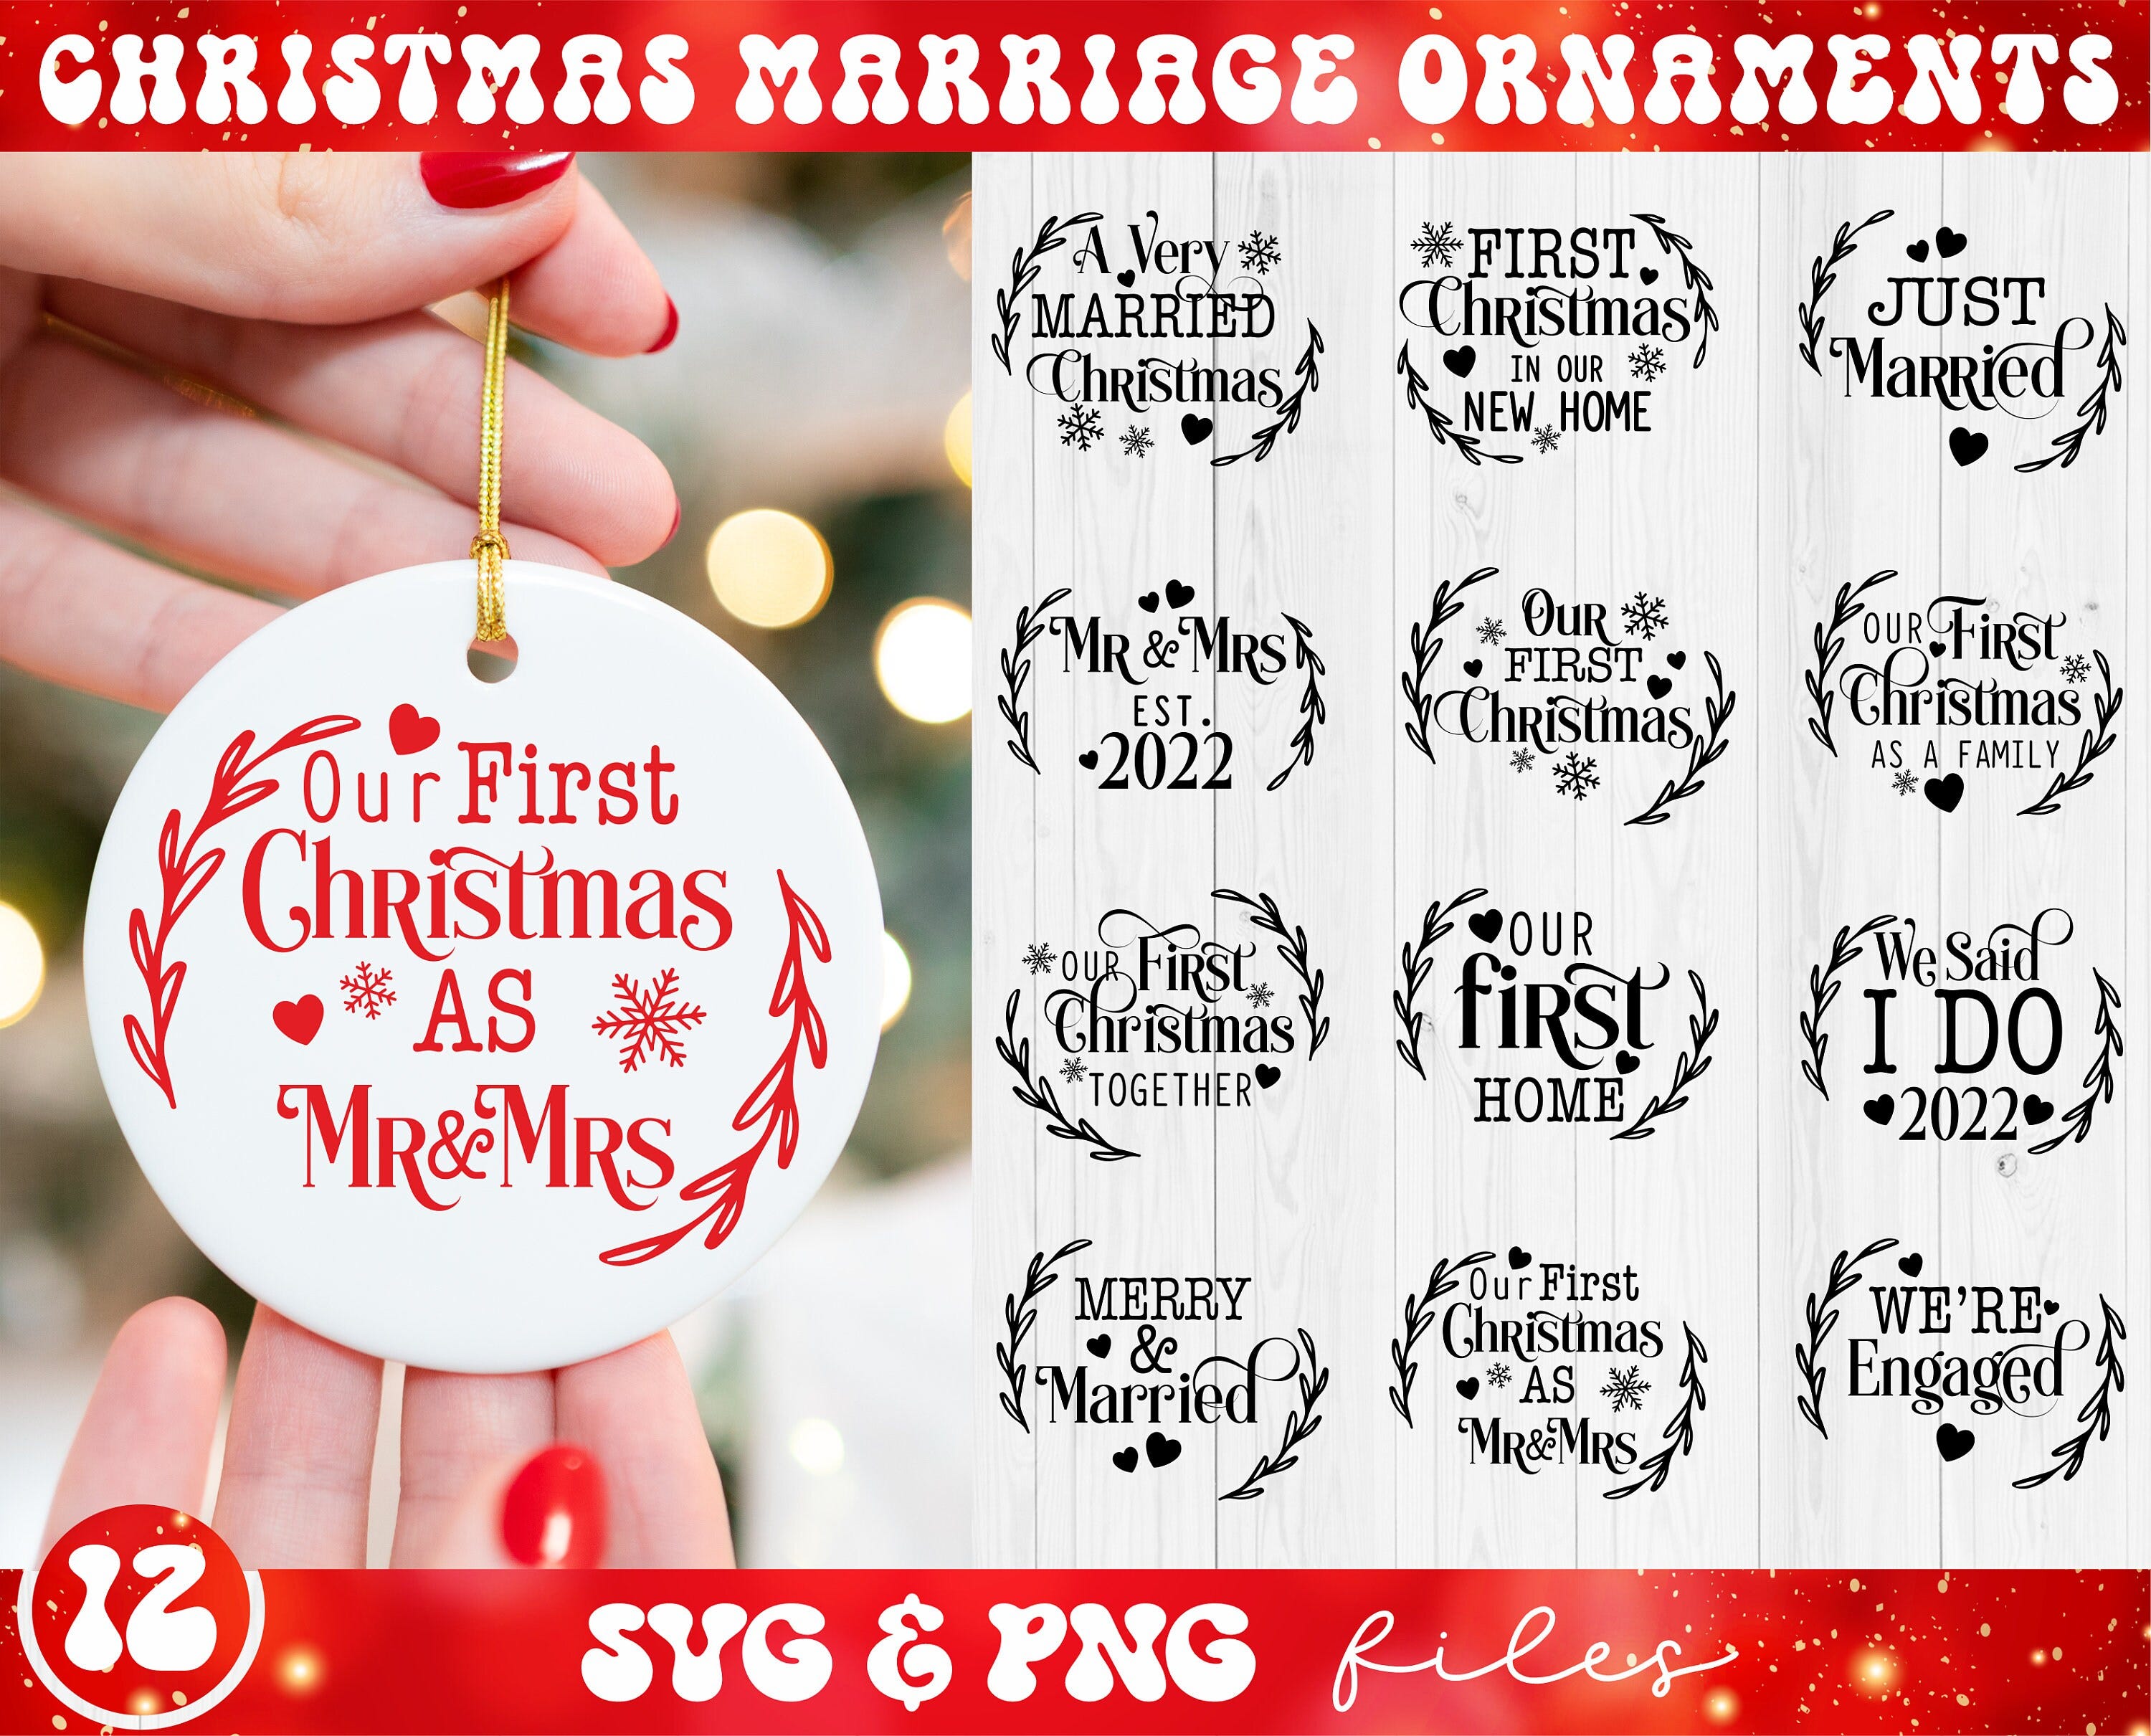 Christmas Marriage Ornaments SVG Bundle, Our First Christmas svg, Christmas Ornament svg, Merry and Married svg